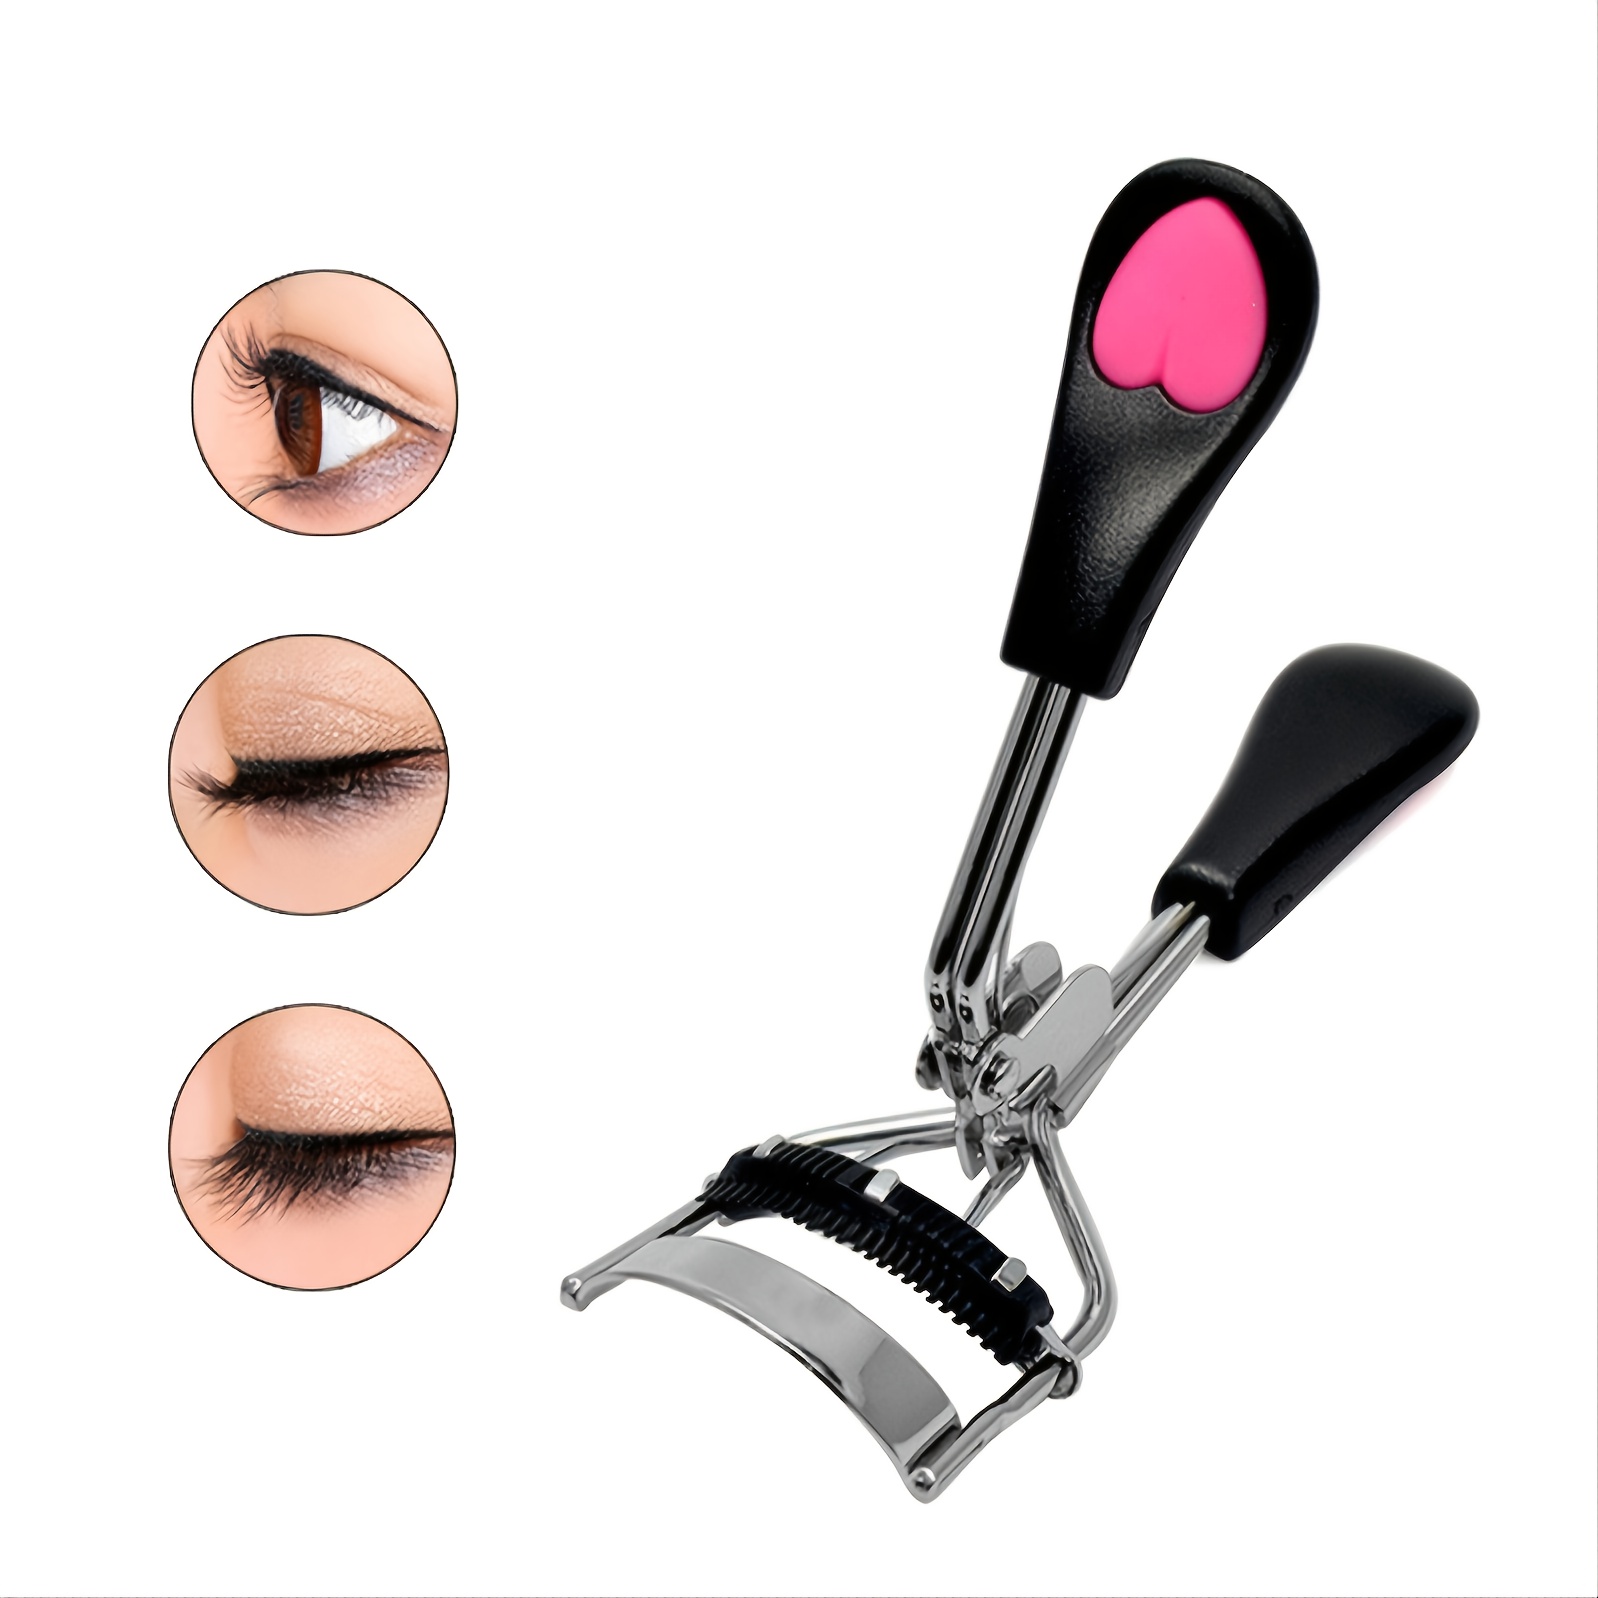 1 Pack Eyelash Curler Eye Makeup Tool Professional Daily Makeup Eyelash Curler Tool With Built in Comb Attachment Get Perfect Curly Lashes In Seconds